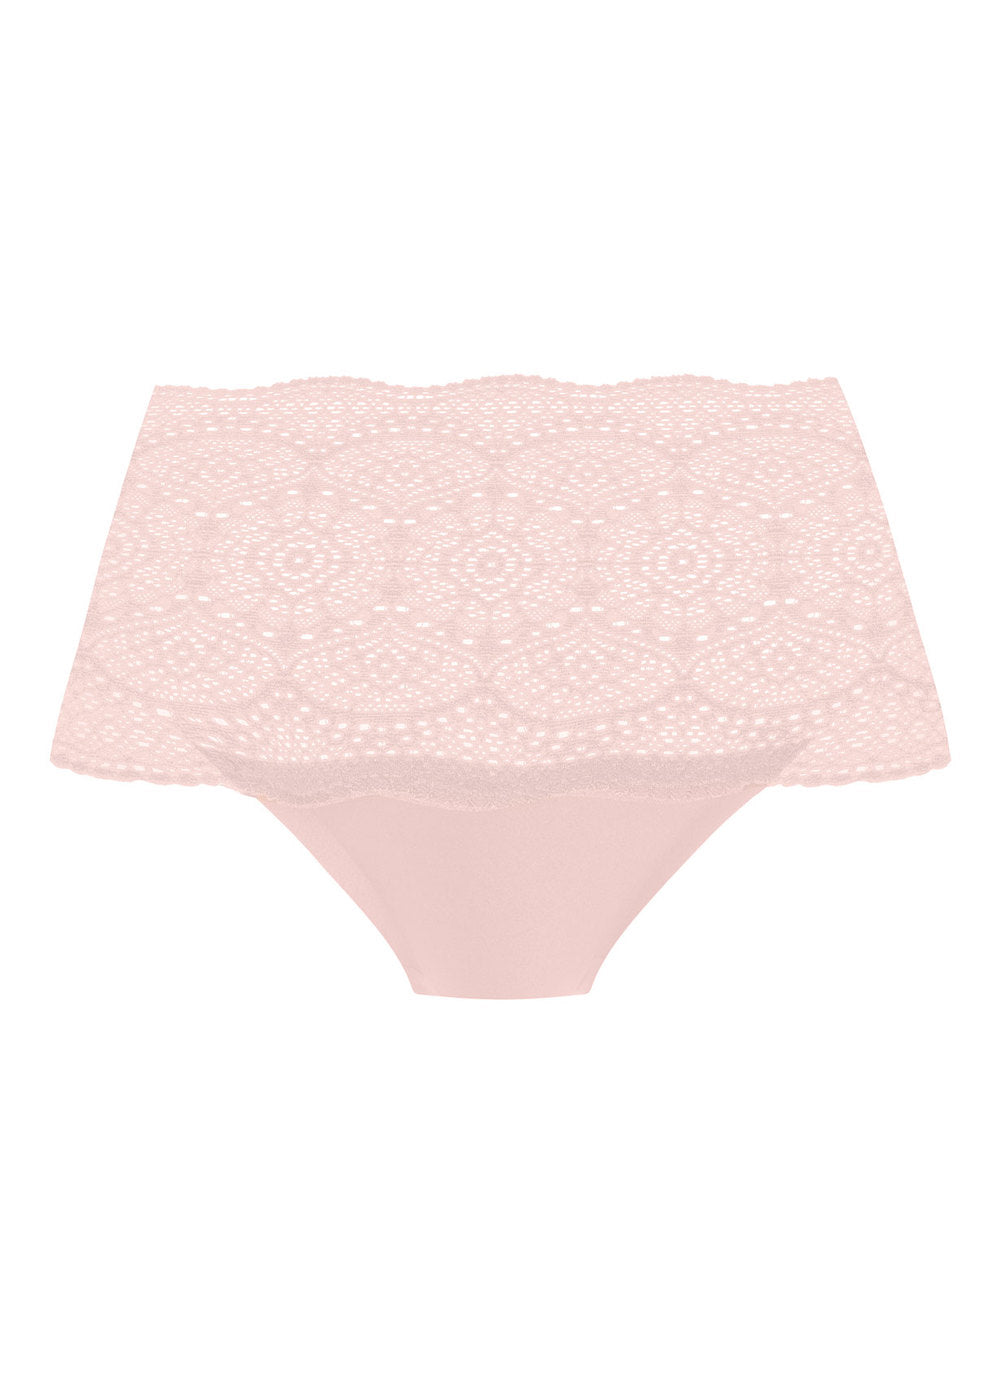 Fantasie Lace Ease Smooth Stretch Lace Full Briefs - Blush